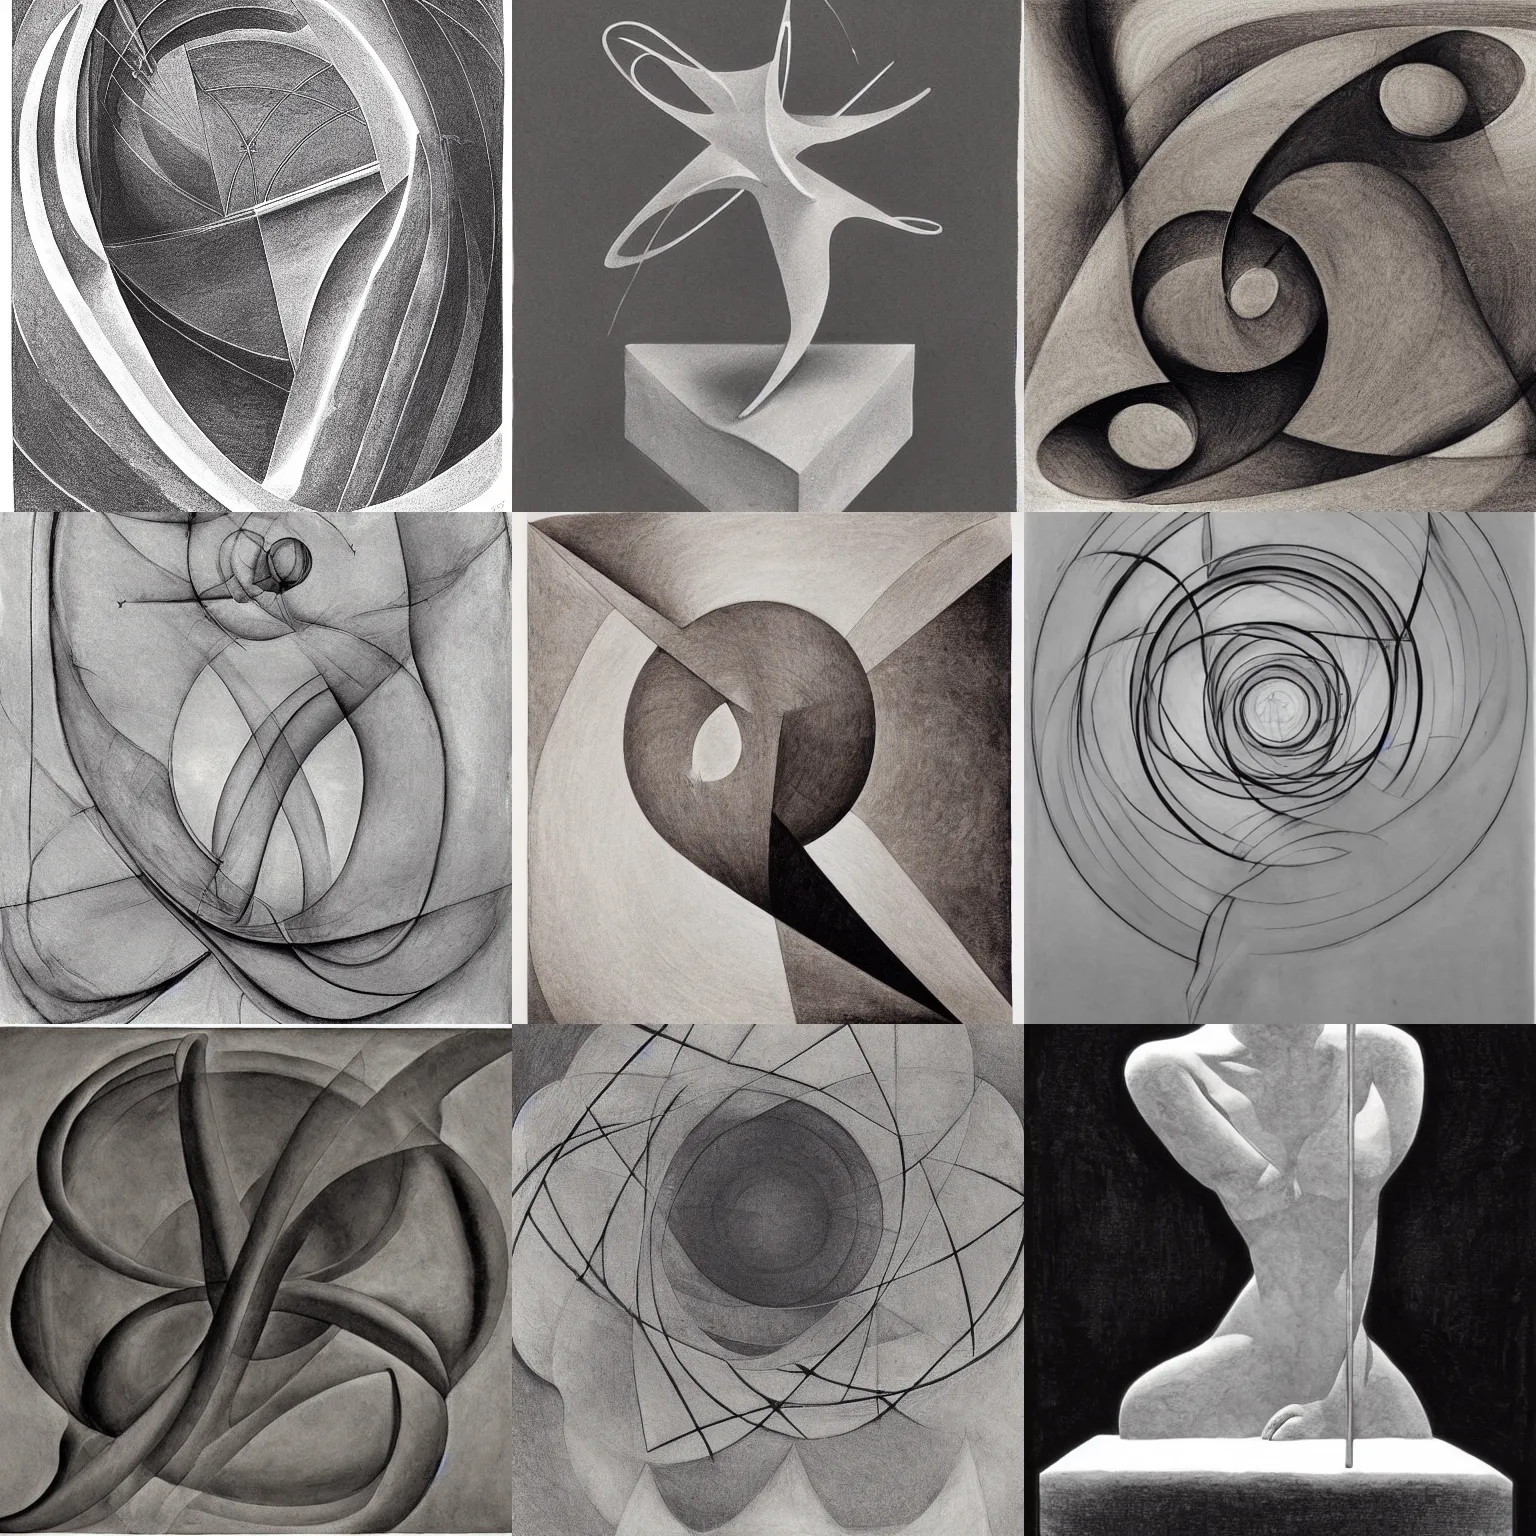 Prompt: tranquility of the endless stars, classical sculpture, ink wash, by Naum Gabo, by Philip Geiger, ink on canvas, abstract sculpture, detailed, cool tones, by Michelangelo, (by M.C. Escher)